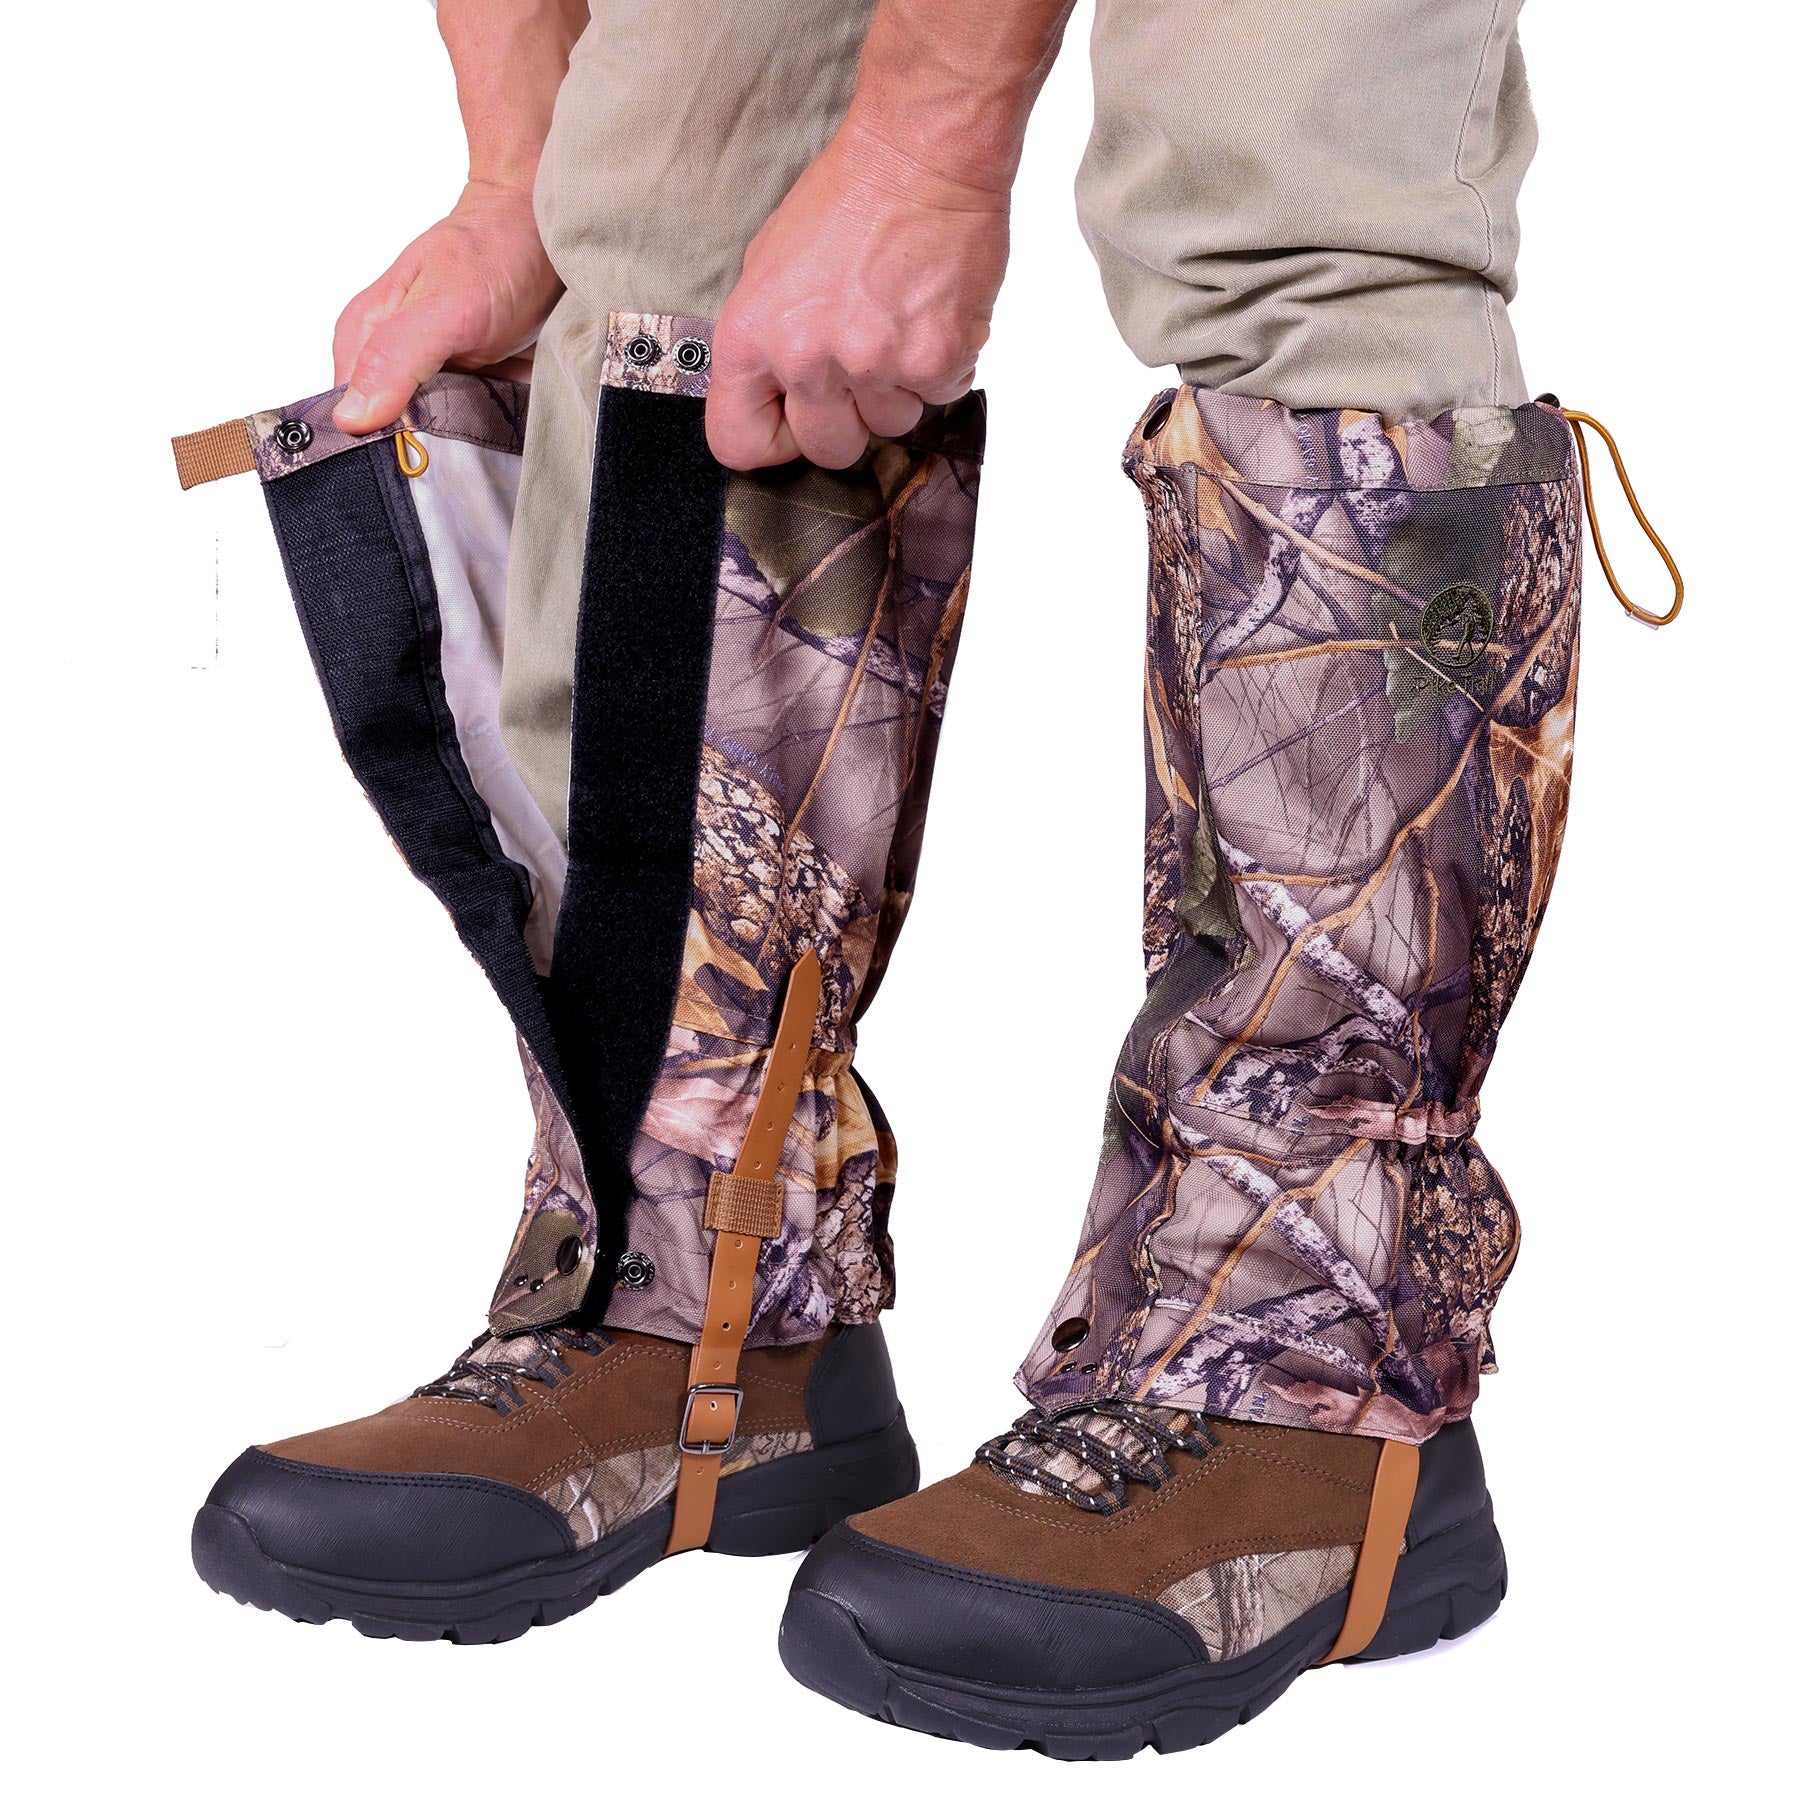 Pike Trail | Gaiters, Blankets, Liners & More For The Outdoors